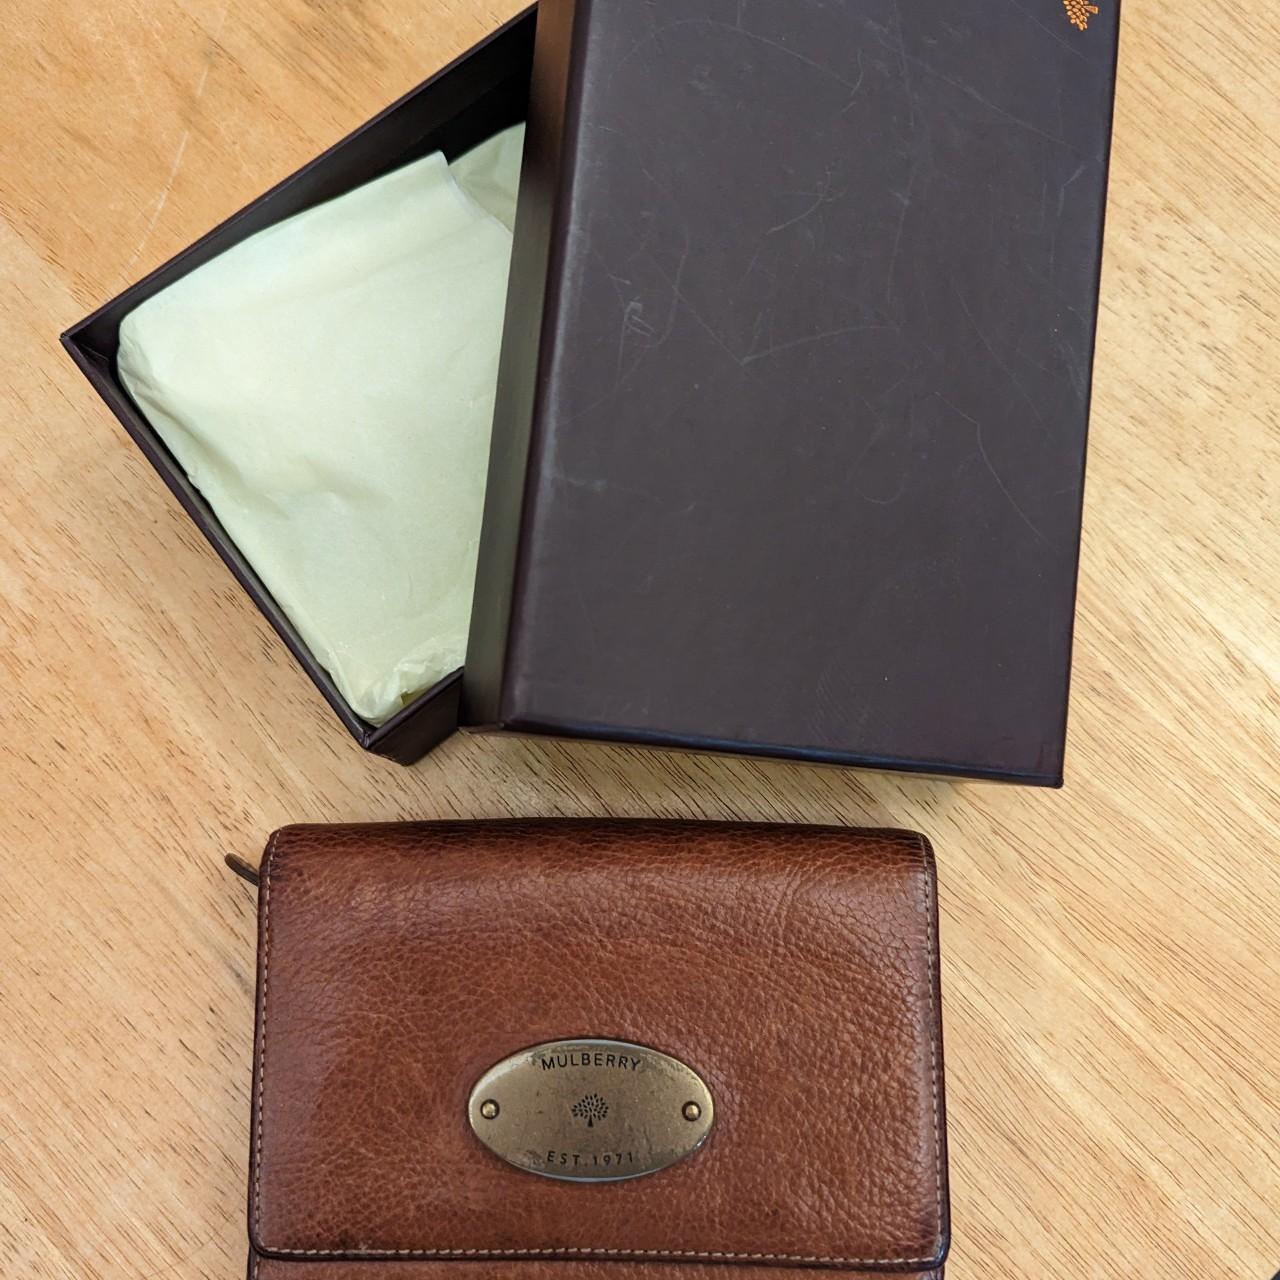 Mulberry Women's Wallets with Credit Card for sale | eBay